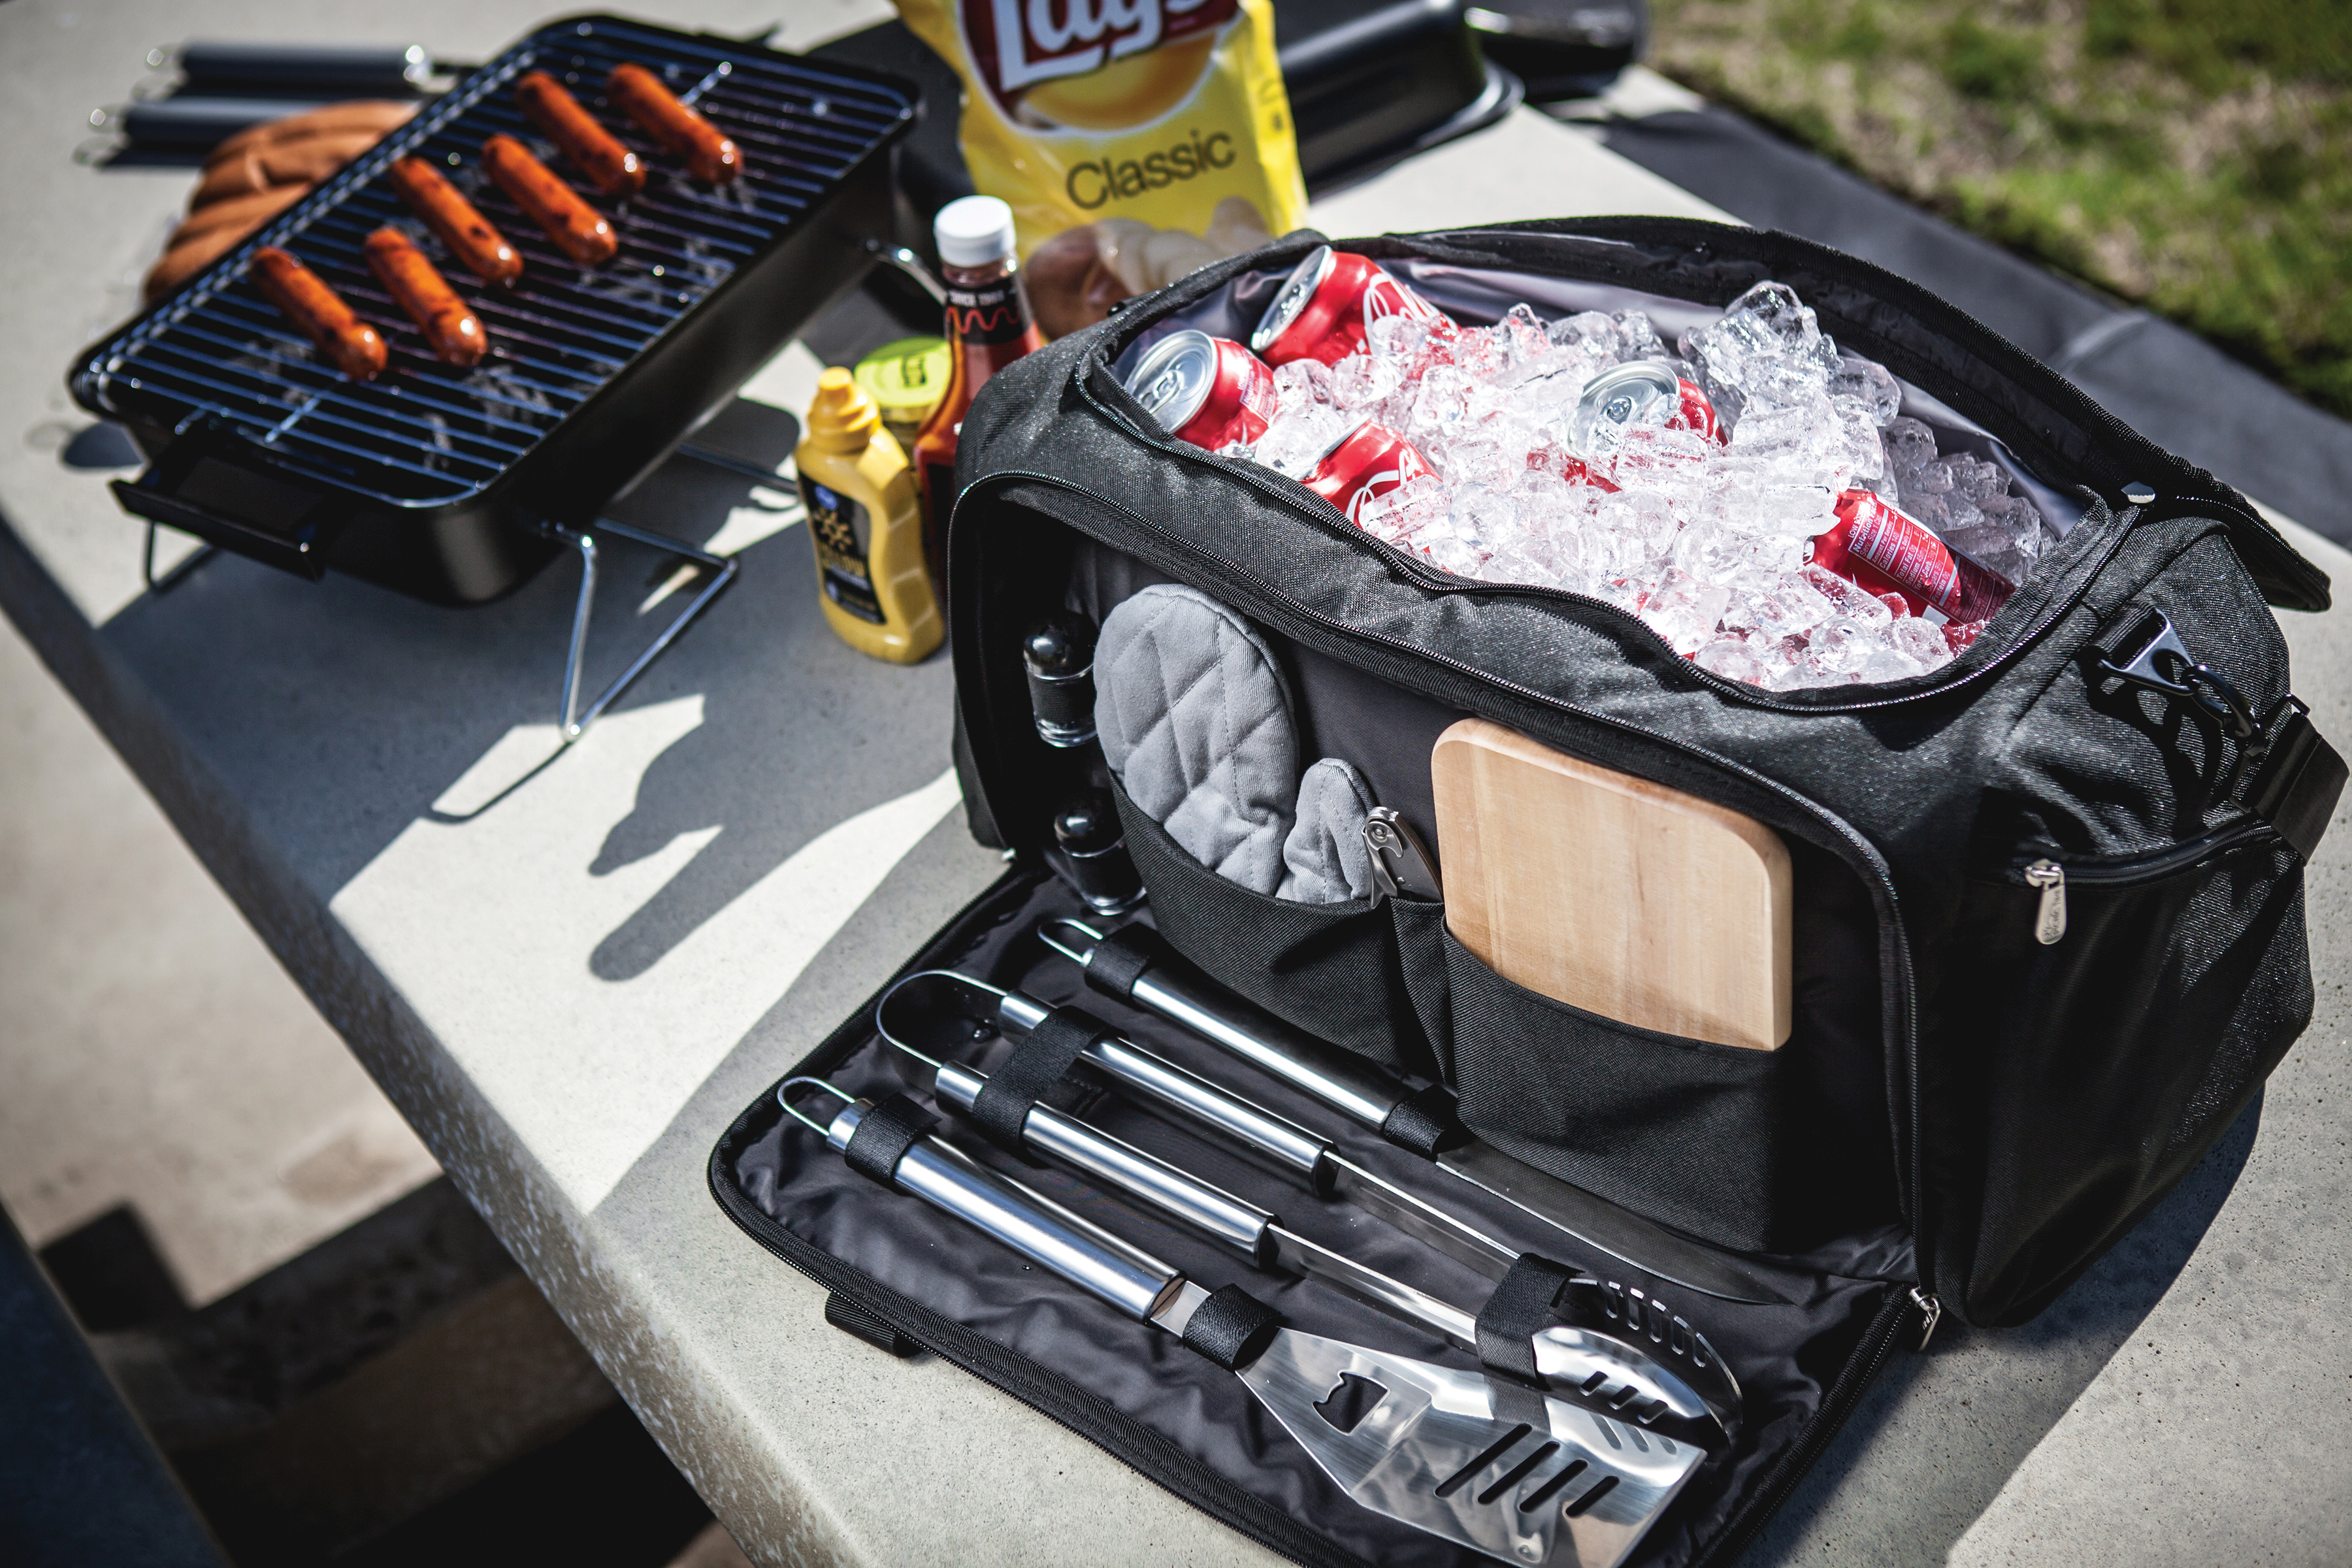 Michigan State Spartans - BBQ Kit Grill Set & Cooler